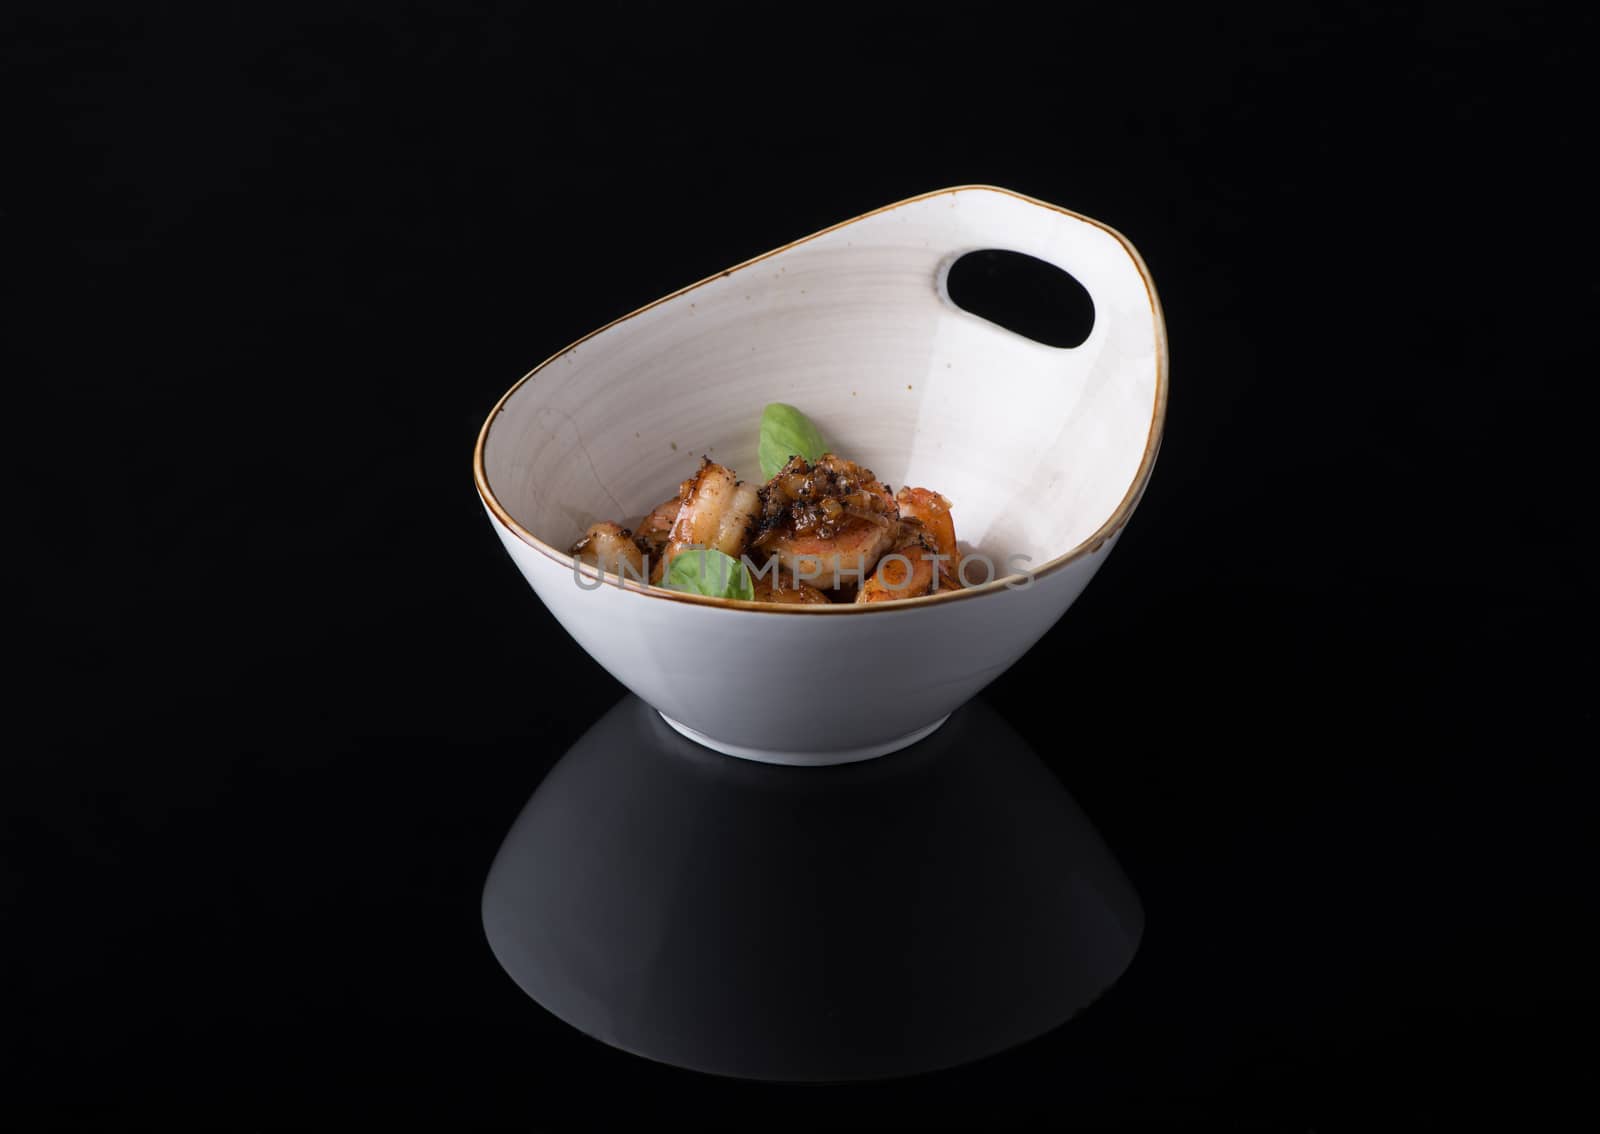 dish of meat in a bowl on a black background, isolated